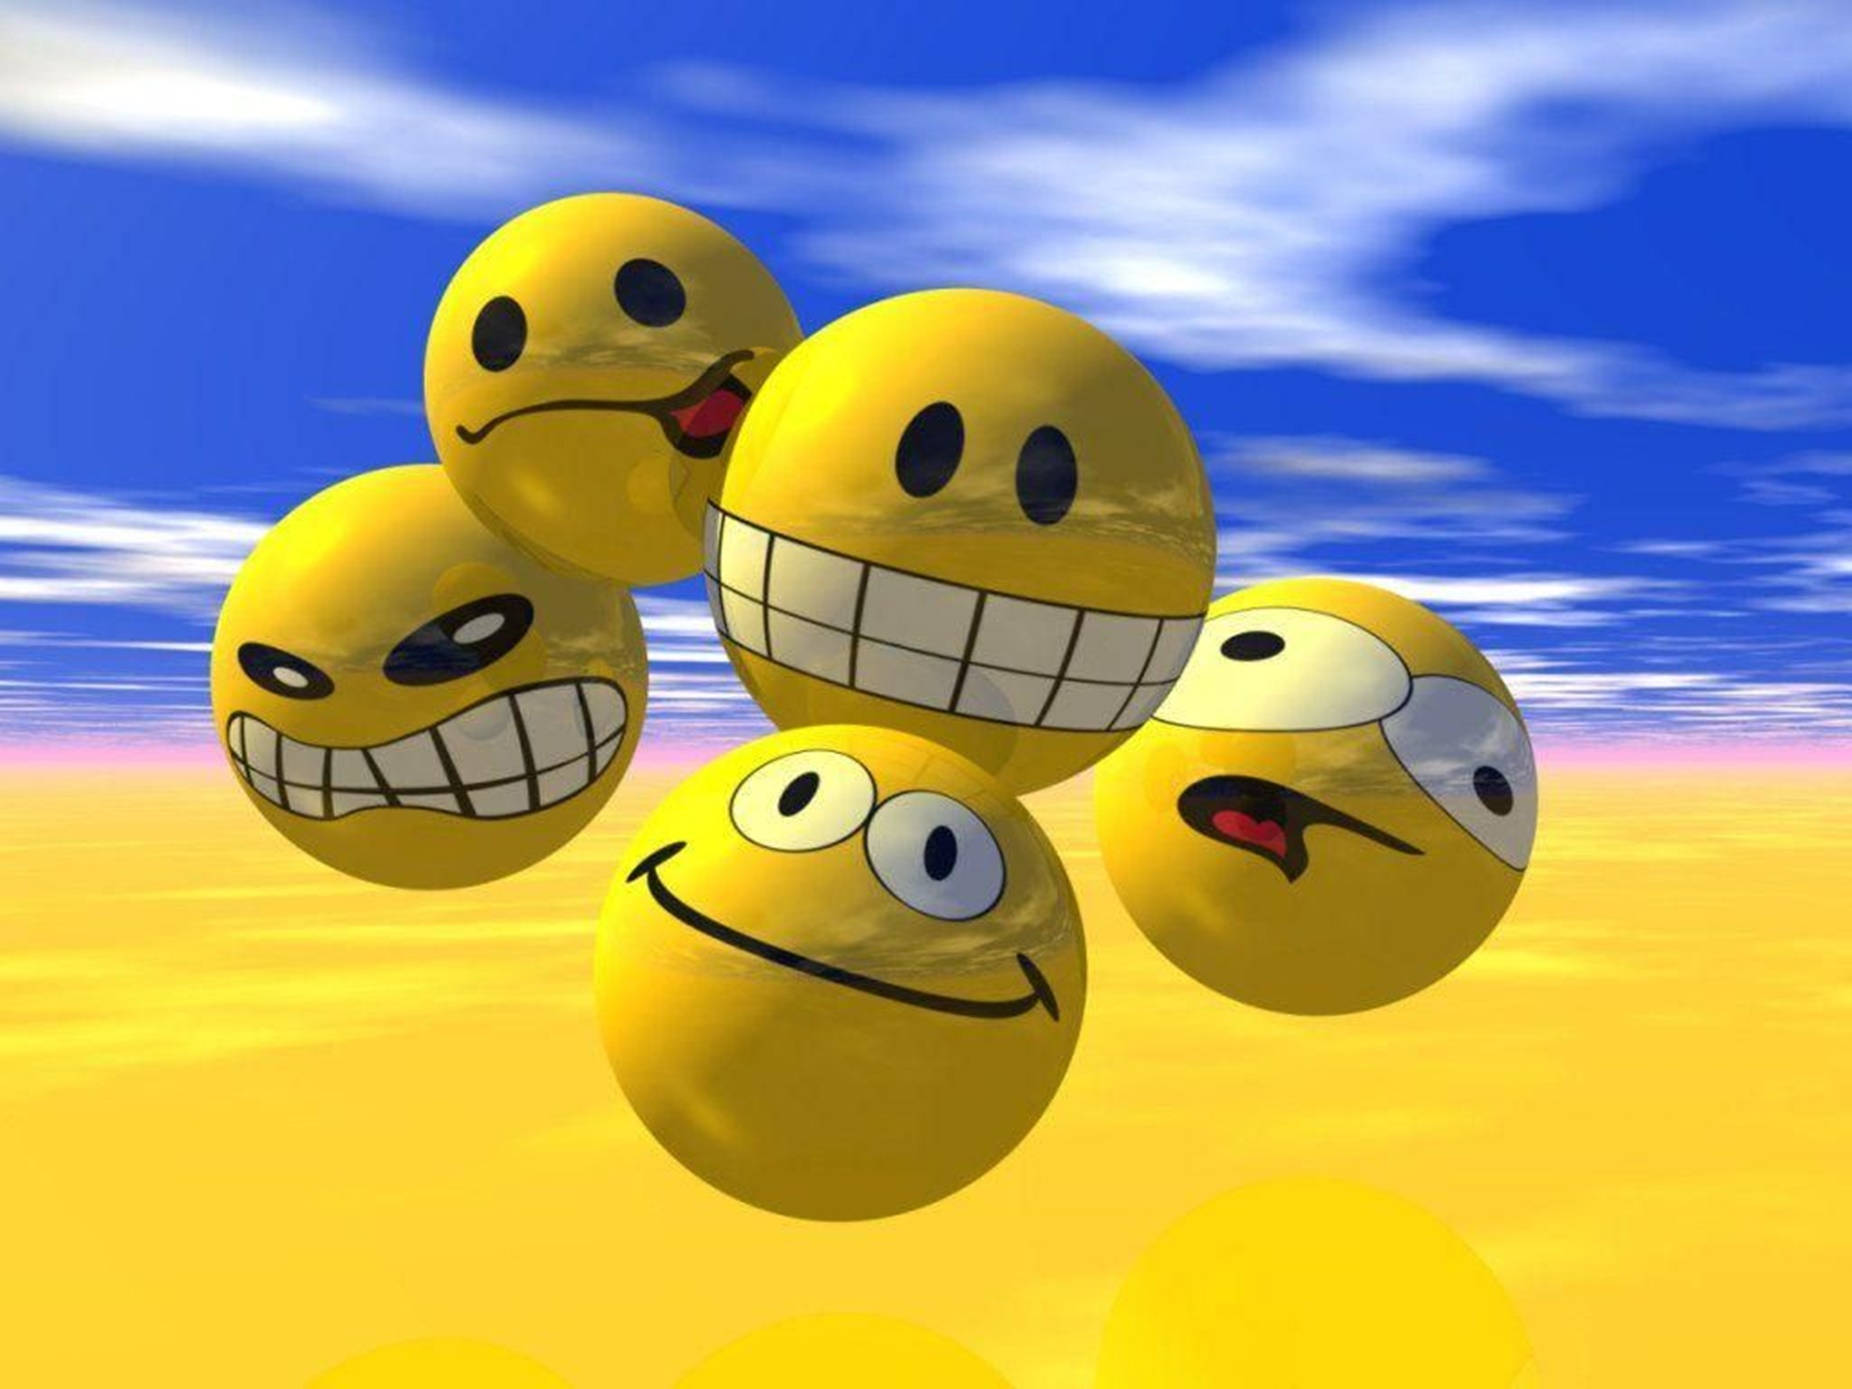 Funny Yellow Emoticons 3d Animation